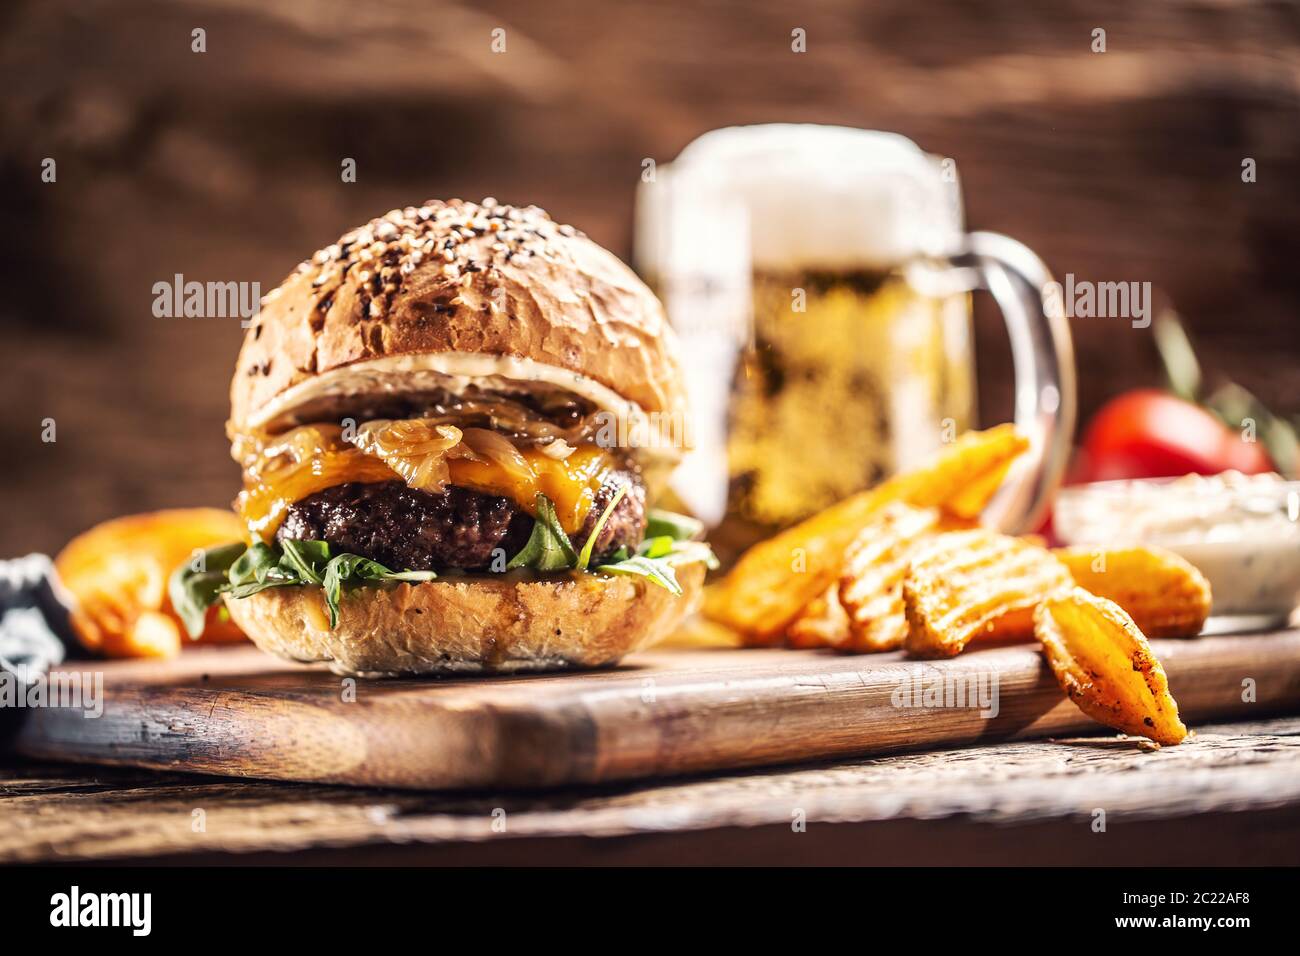 Beef burger with caramelized onion, arugula and melted cheese with potato wedges and draft beer in the background Stock Photo